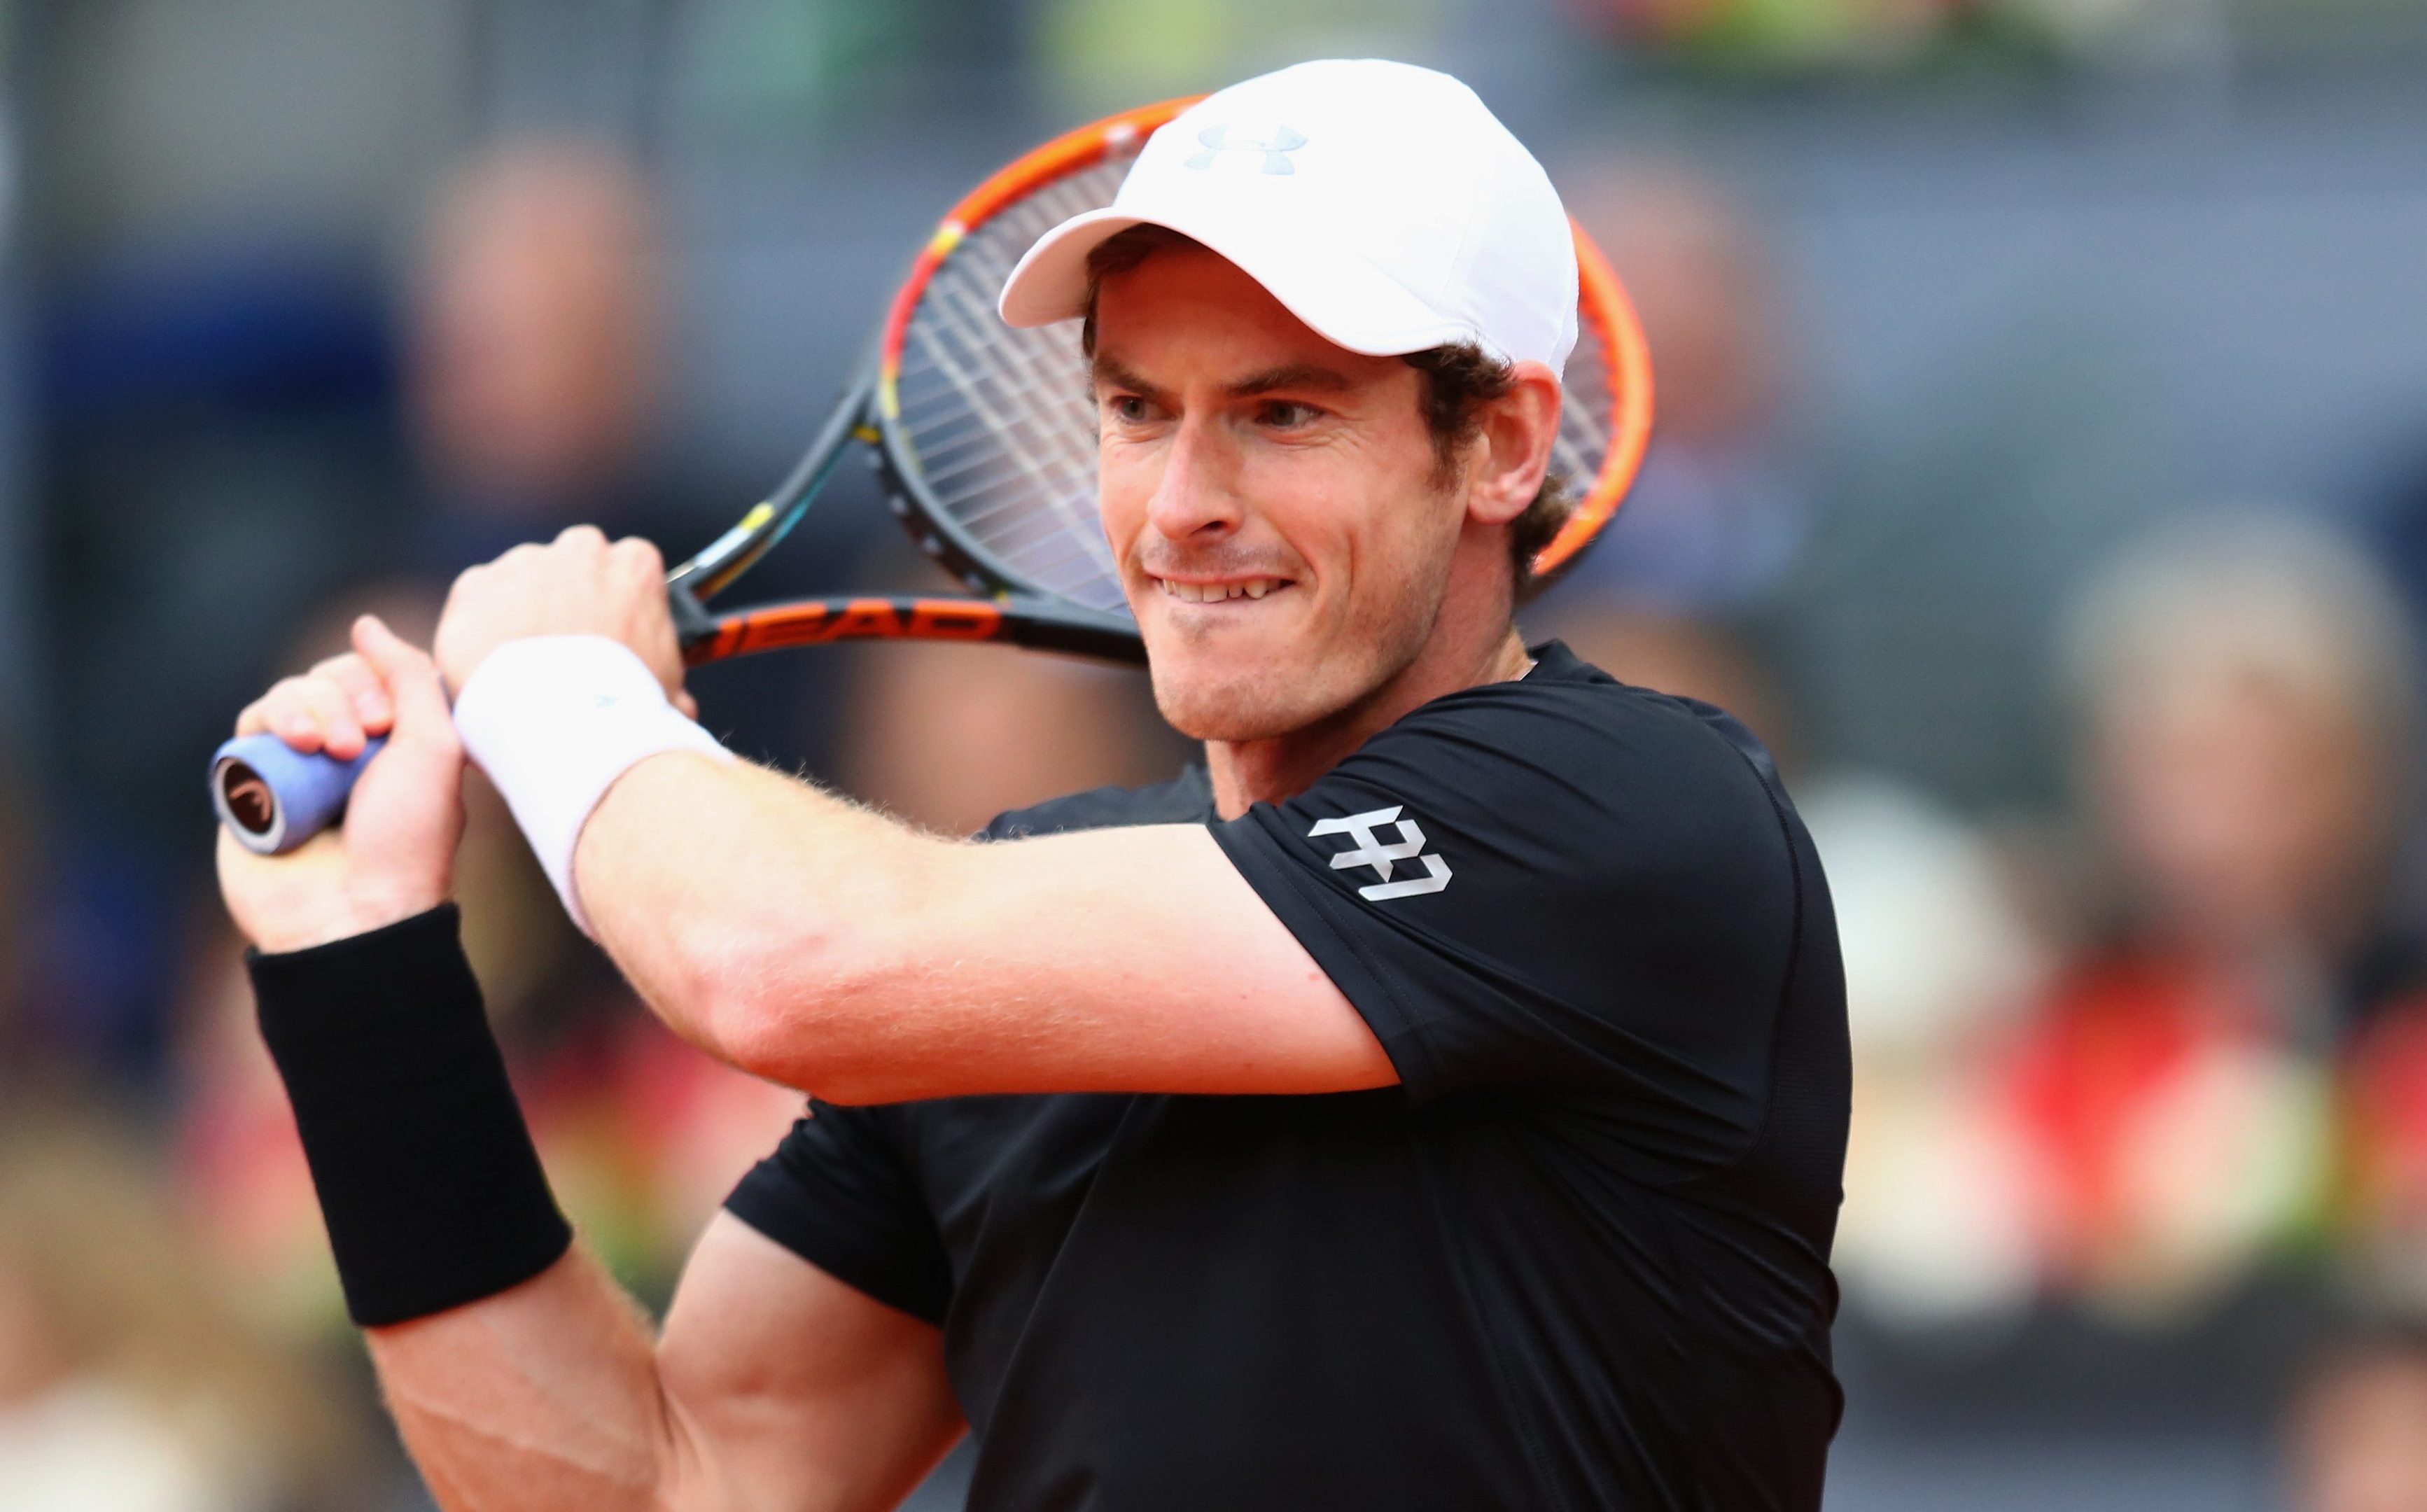 Andy Murray has split from his coach ahead of a busy summer.